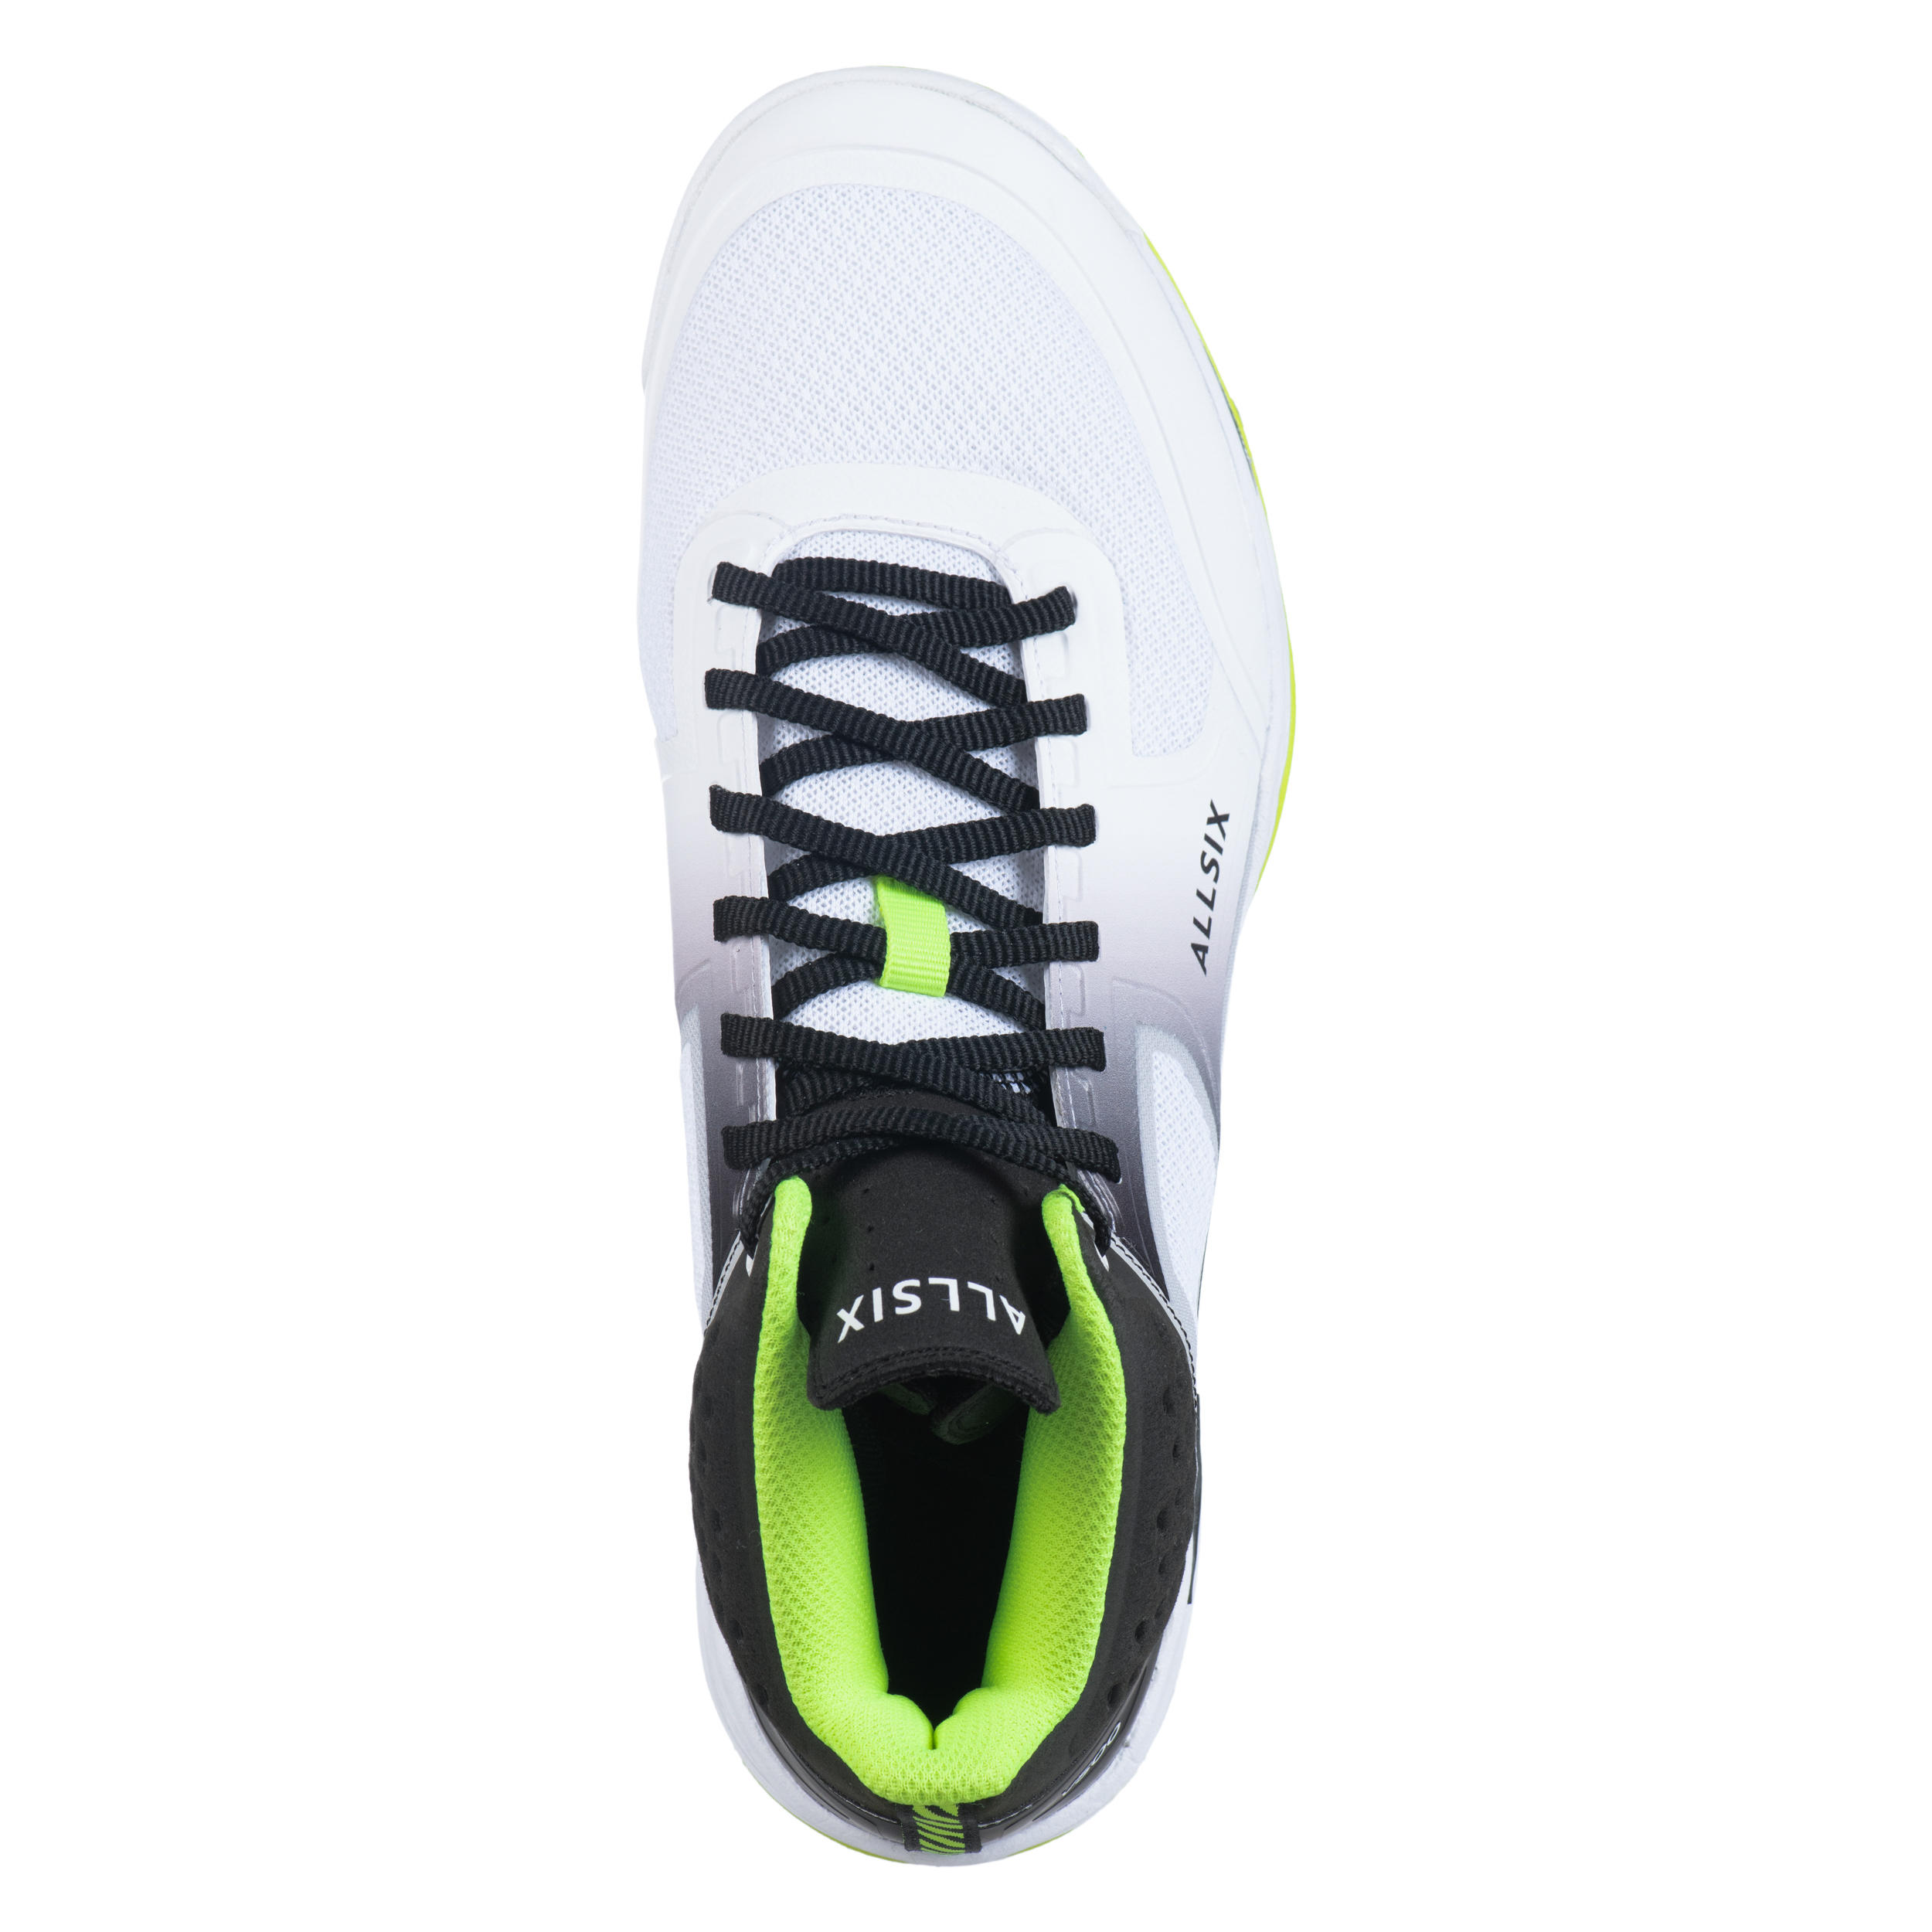 Men's Volleyball Mid Shoes V500 - White/Yellow/Black 7/8